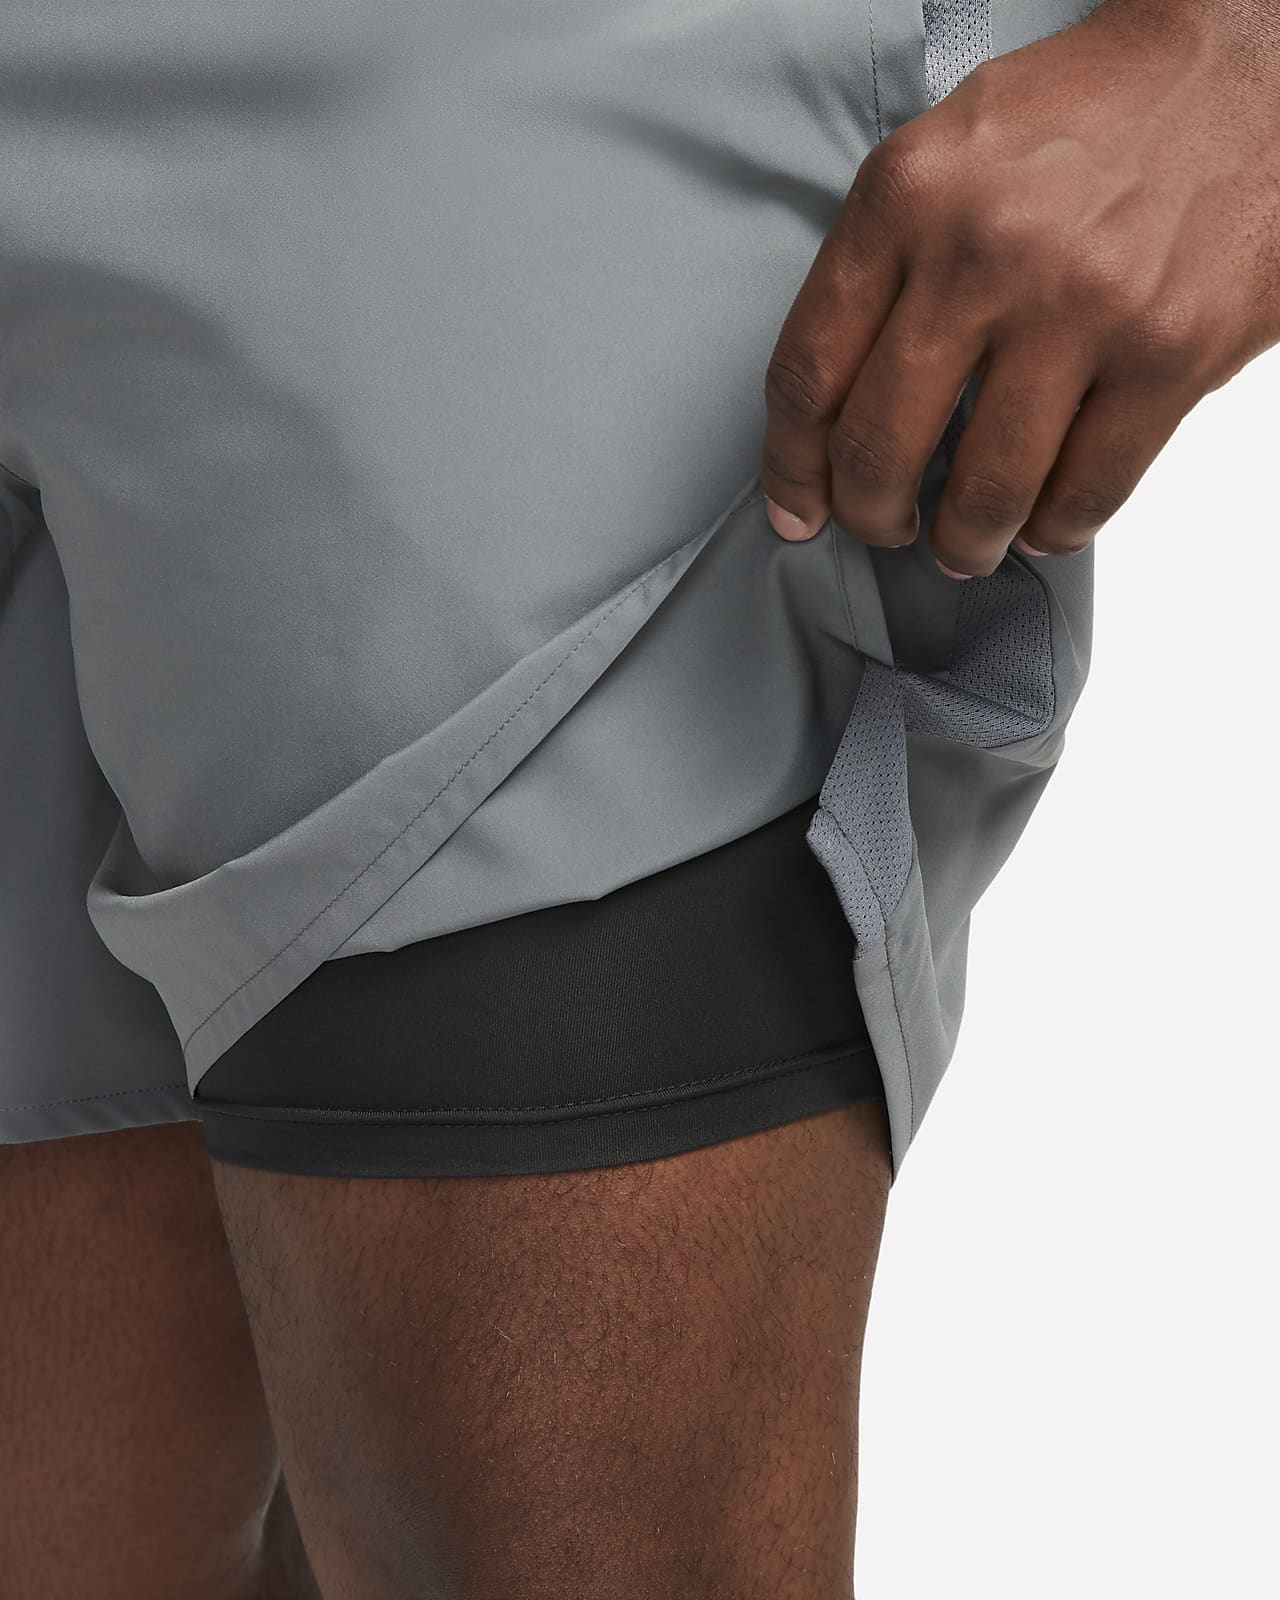 Runner's Guide to Wearing Compression Shorts. Nike CA